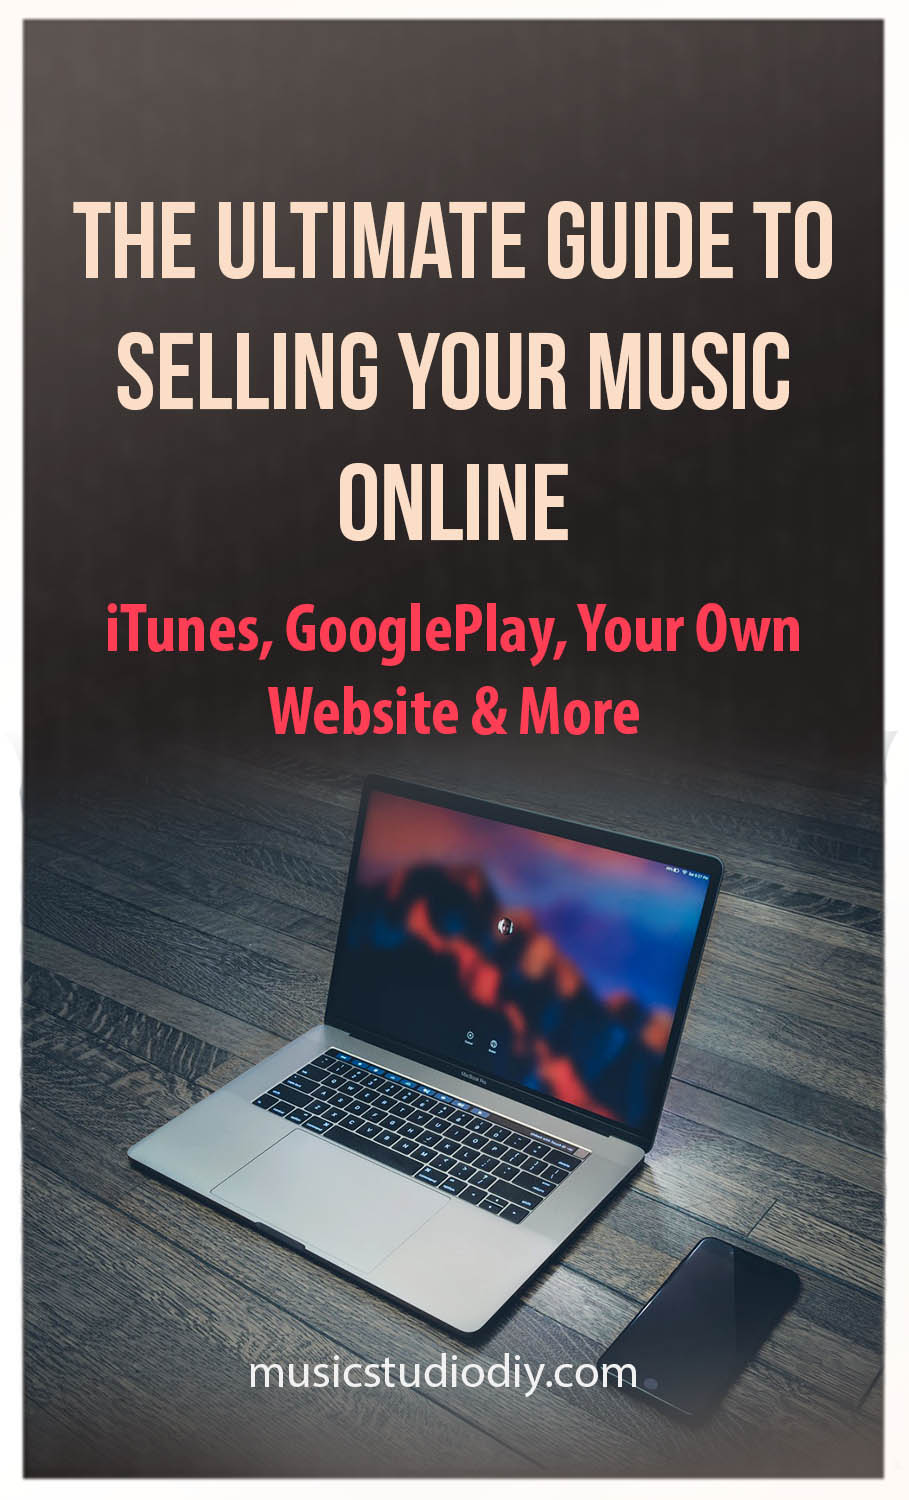 How to sell your music online. a guide to digital music marketing.